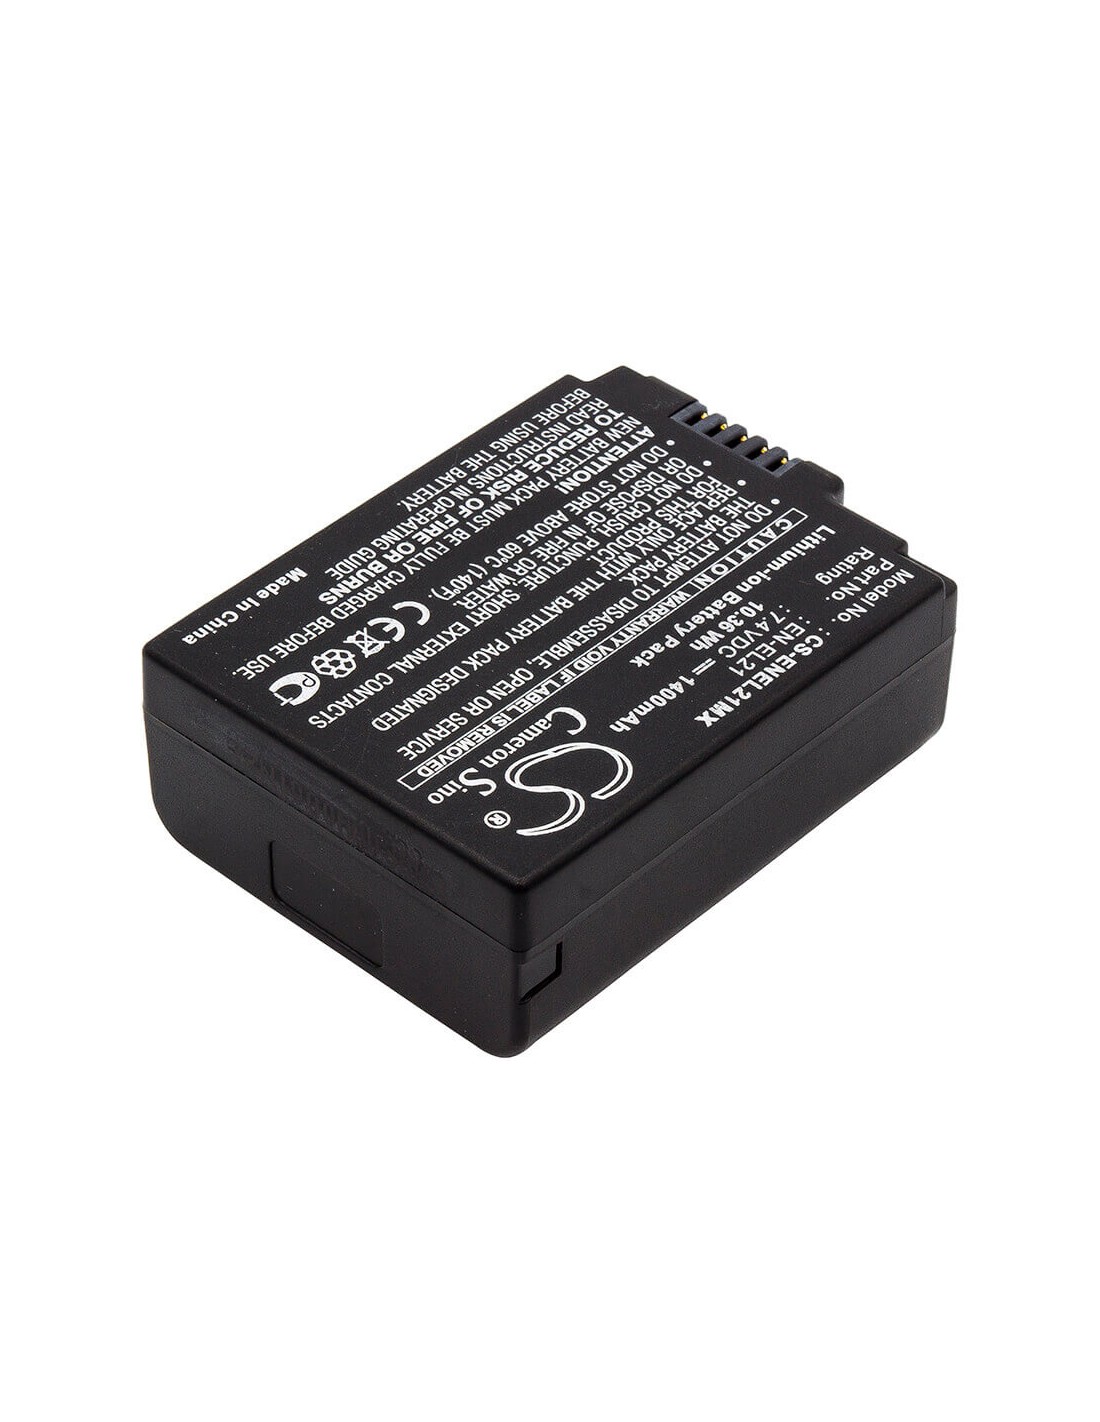 Nikon V2 replacement battery